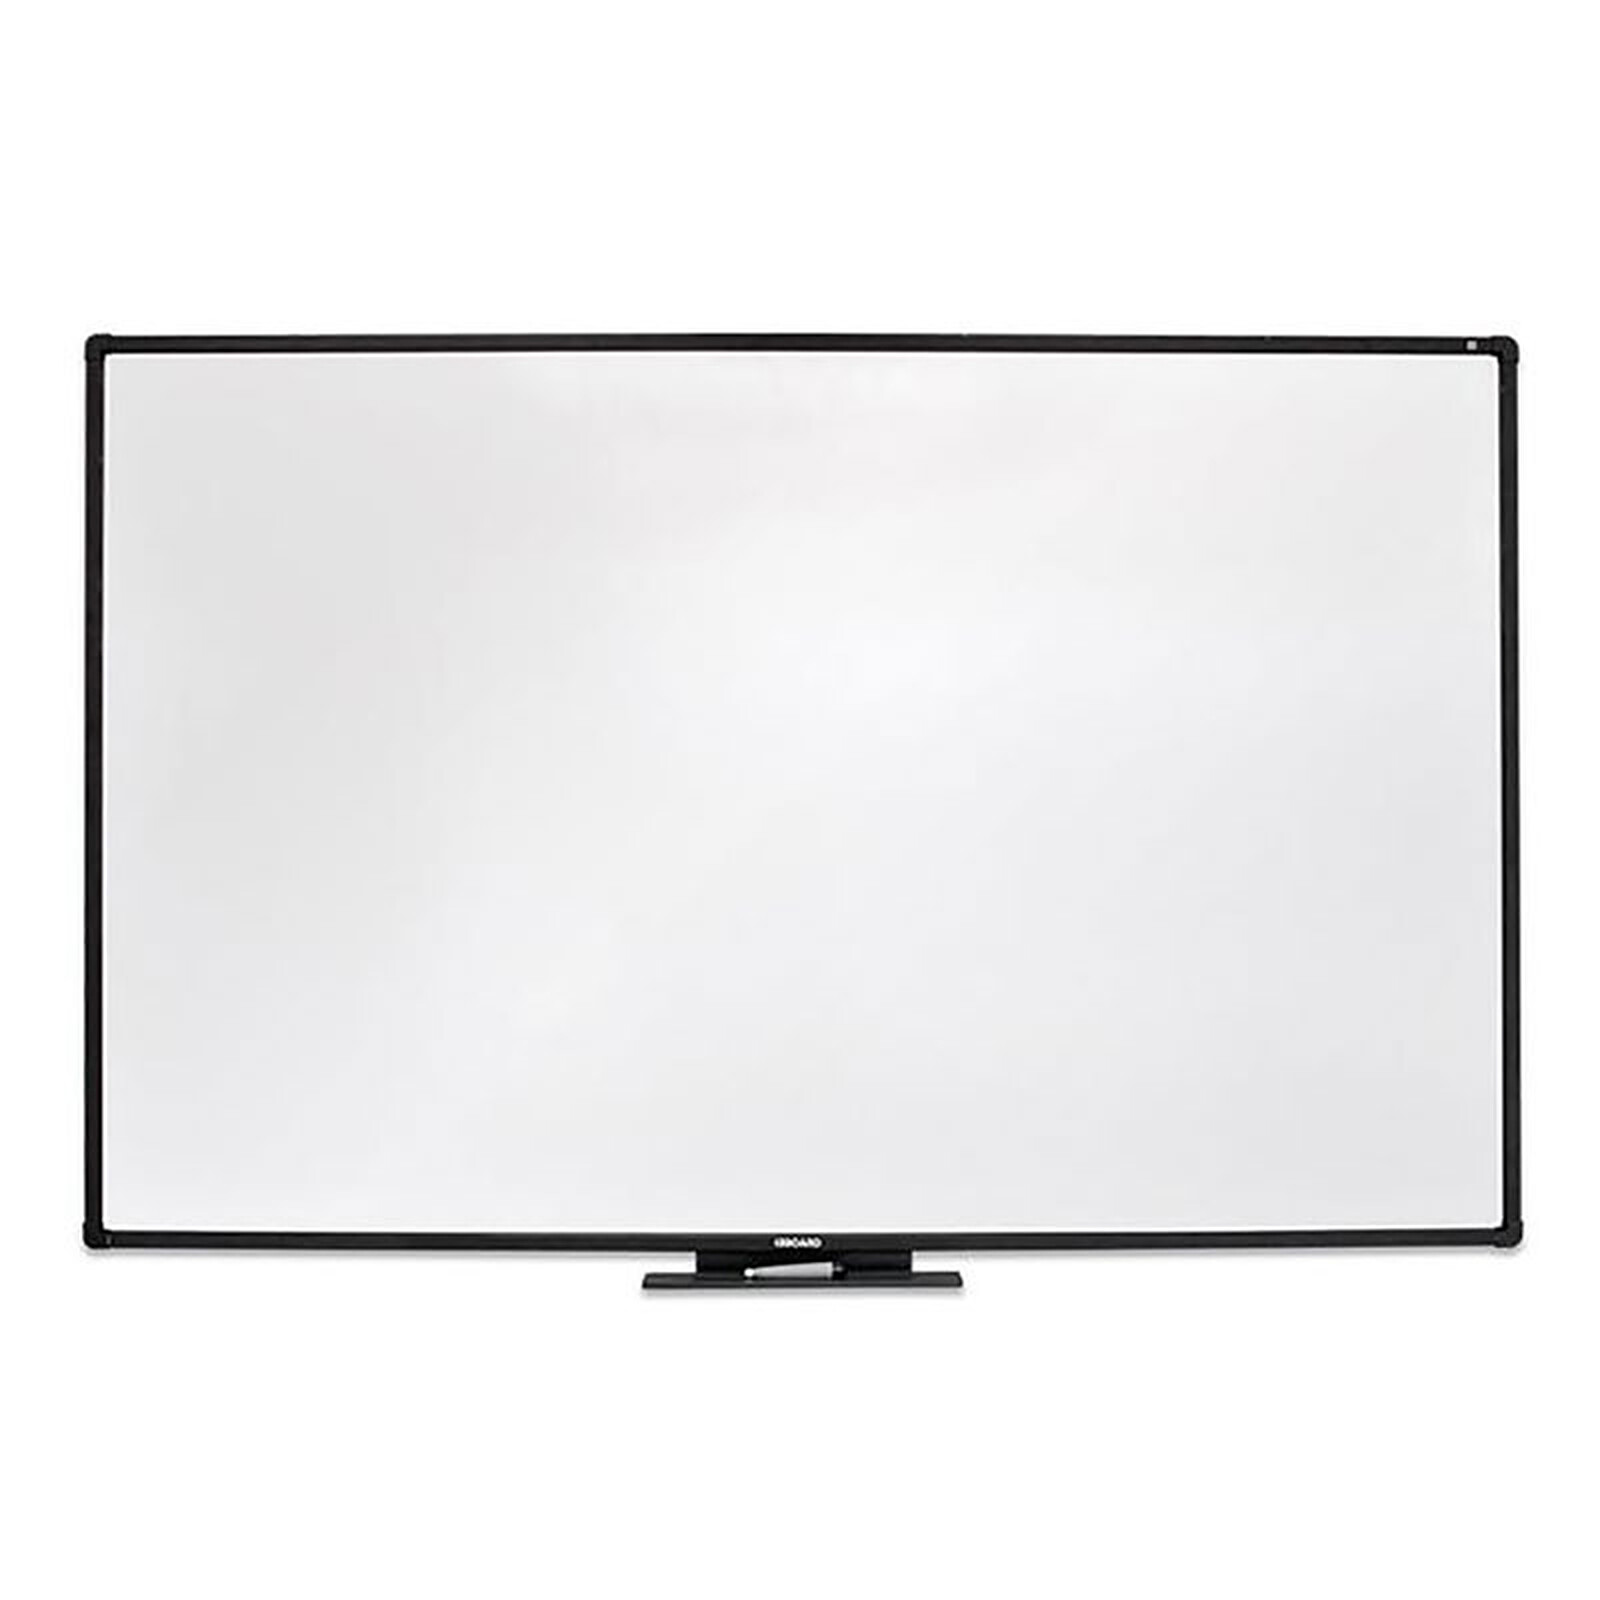 Vanerum i3BOARD Tableau blanc interactif 77 - 6 touch DUO blanc feutre - Tableau  blanc et paperboard - Garantie 3 ans LDLC